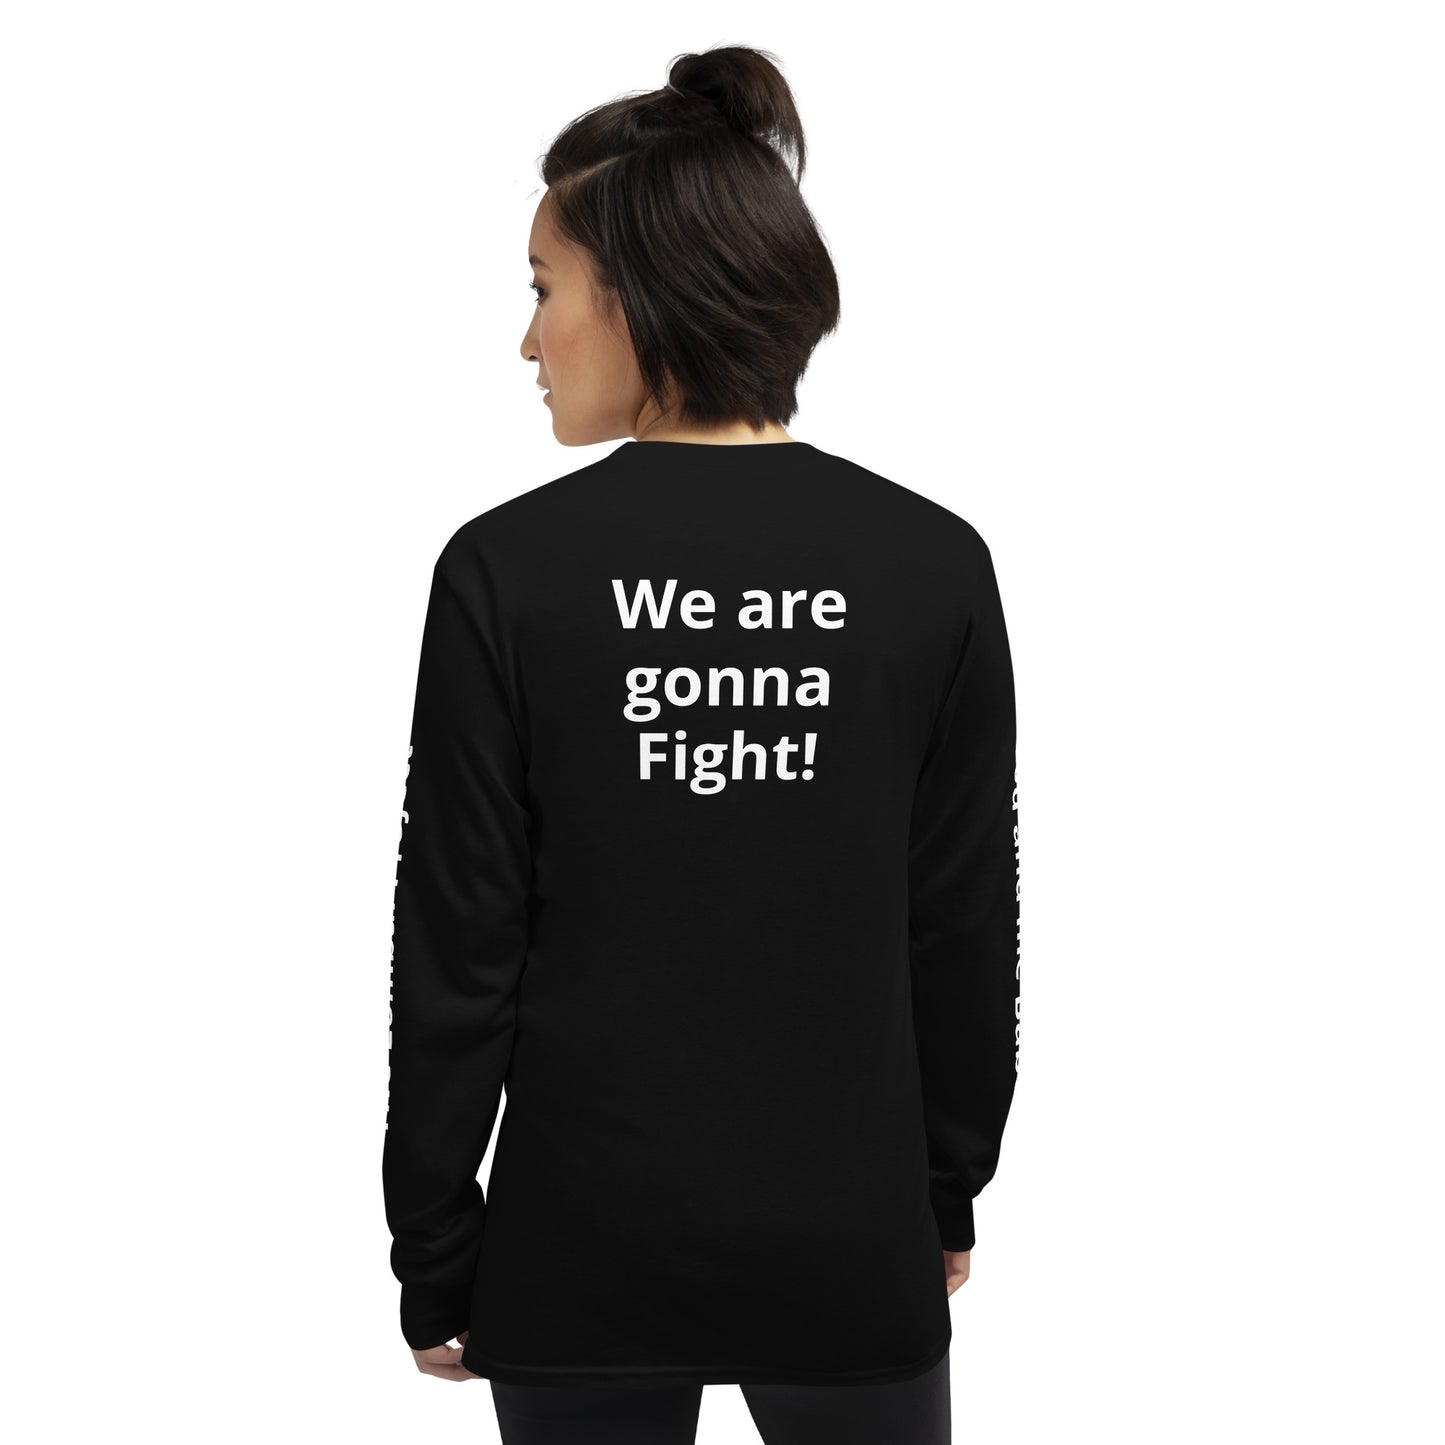 7/12 You and me Babe Long Sleeve Shirt